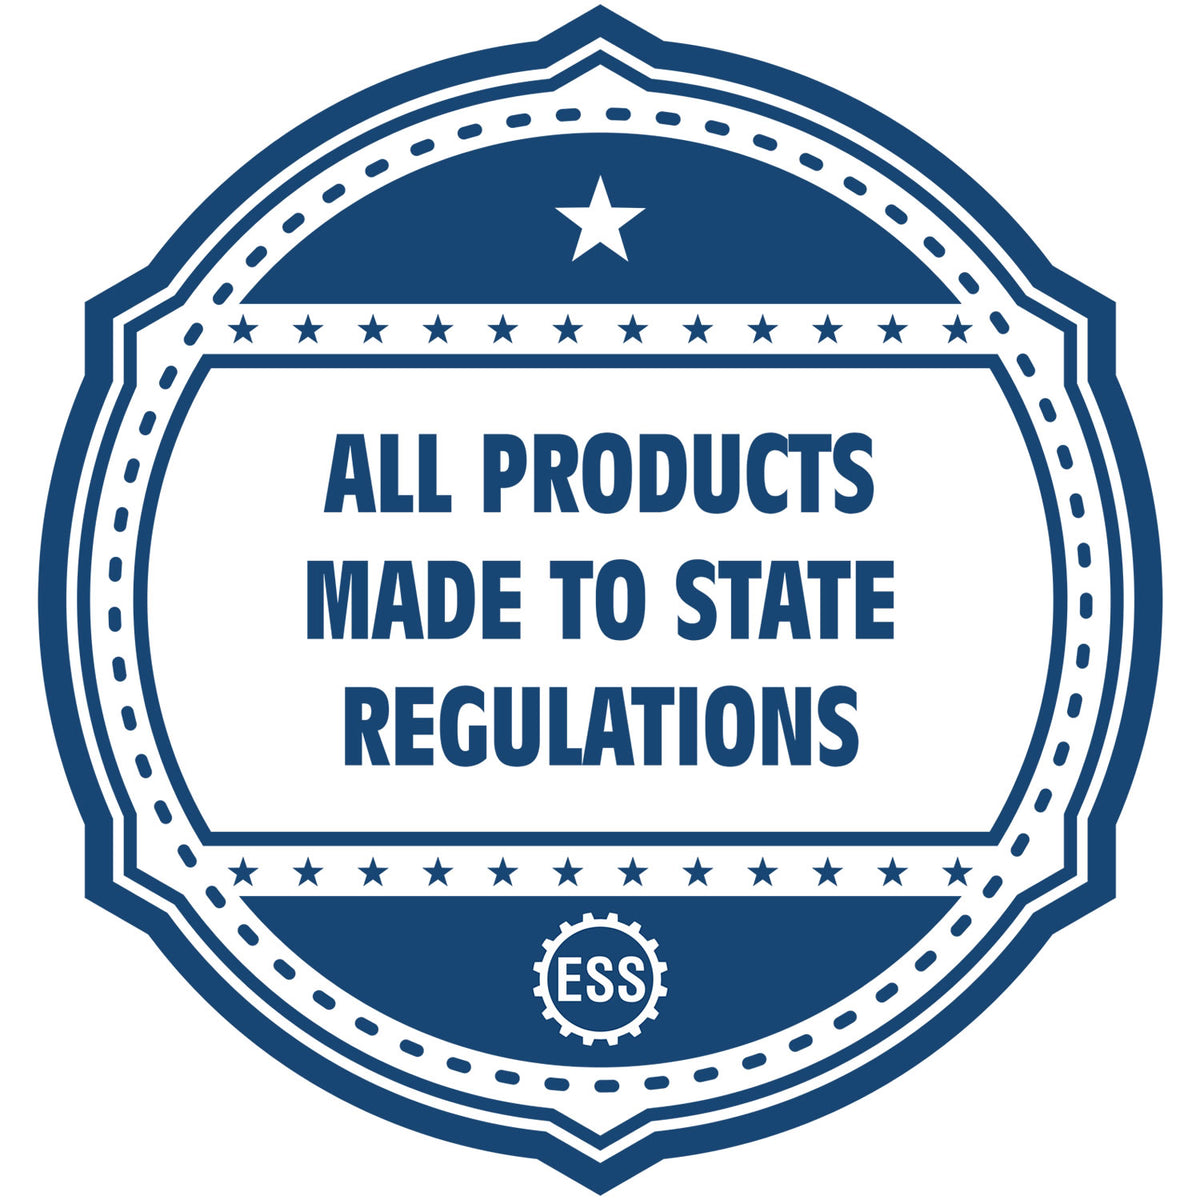 An icon or badge element for the Massachusetts Professional Engineer Seal Stamp showing that this product is made in compliance with state regulations.